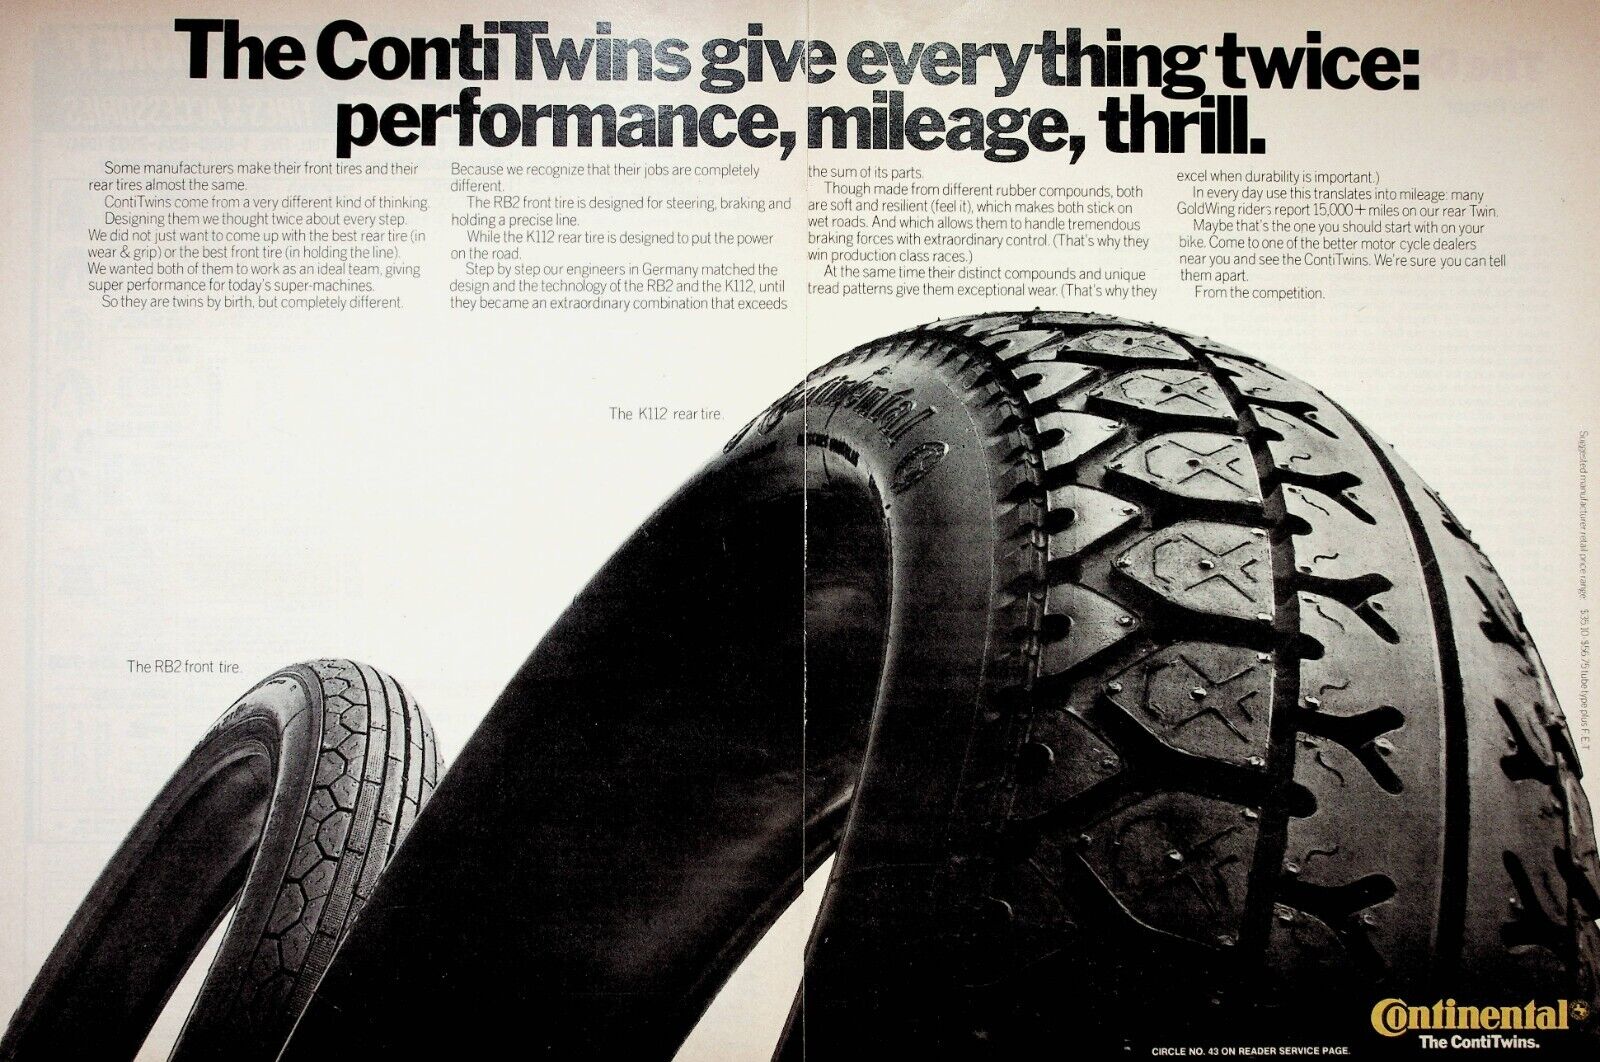 1978 Continental Motorcycle Tires Conti Twins - 2-Page Vintage Ad